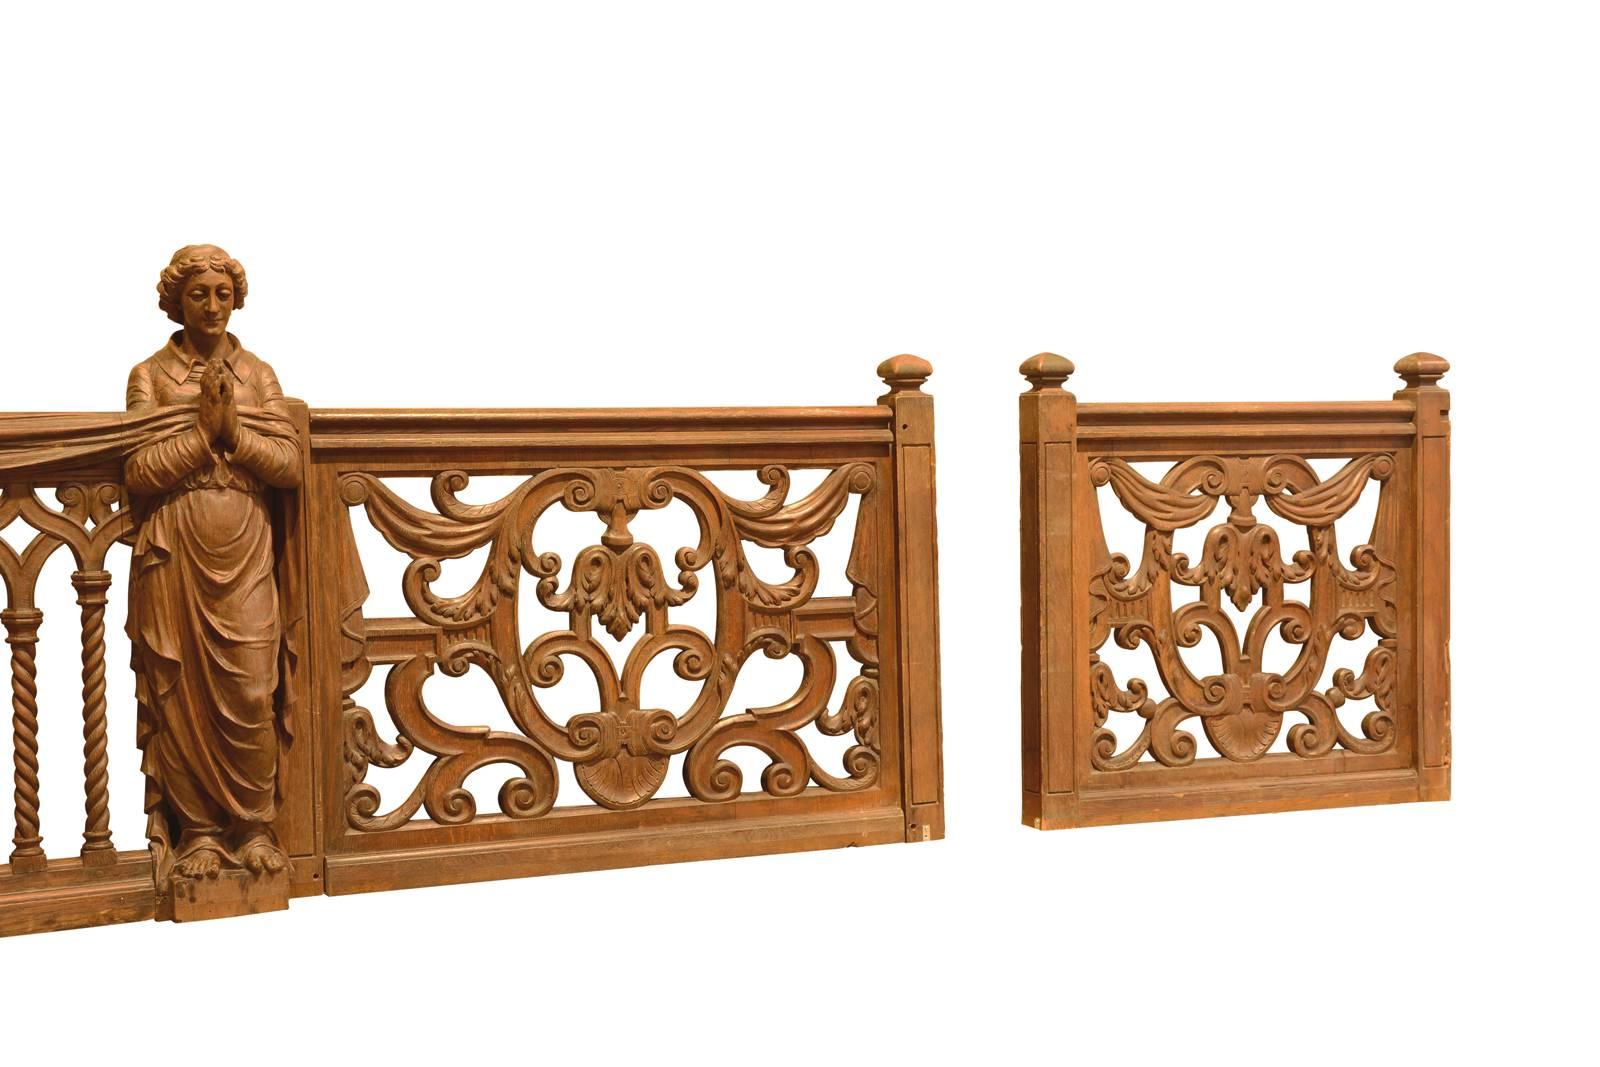 Gothic Revival Oak Balustrade Neogothic Style, 19th Century For Sale